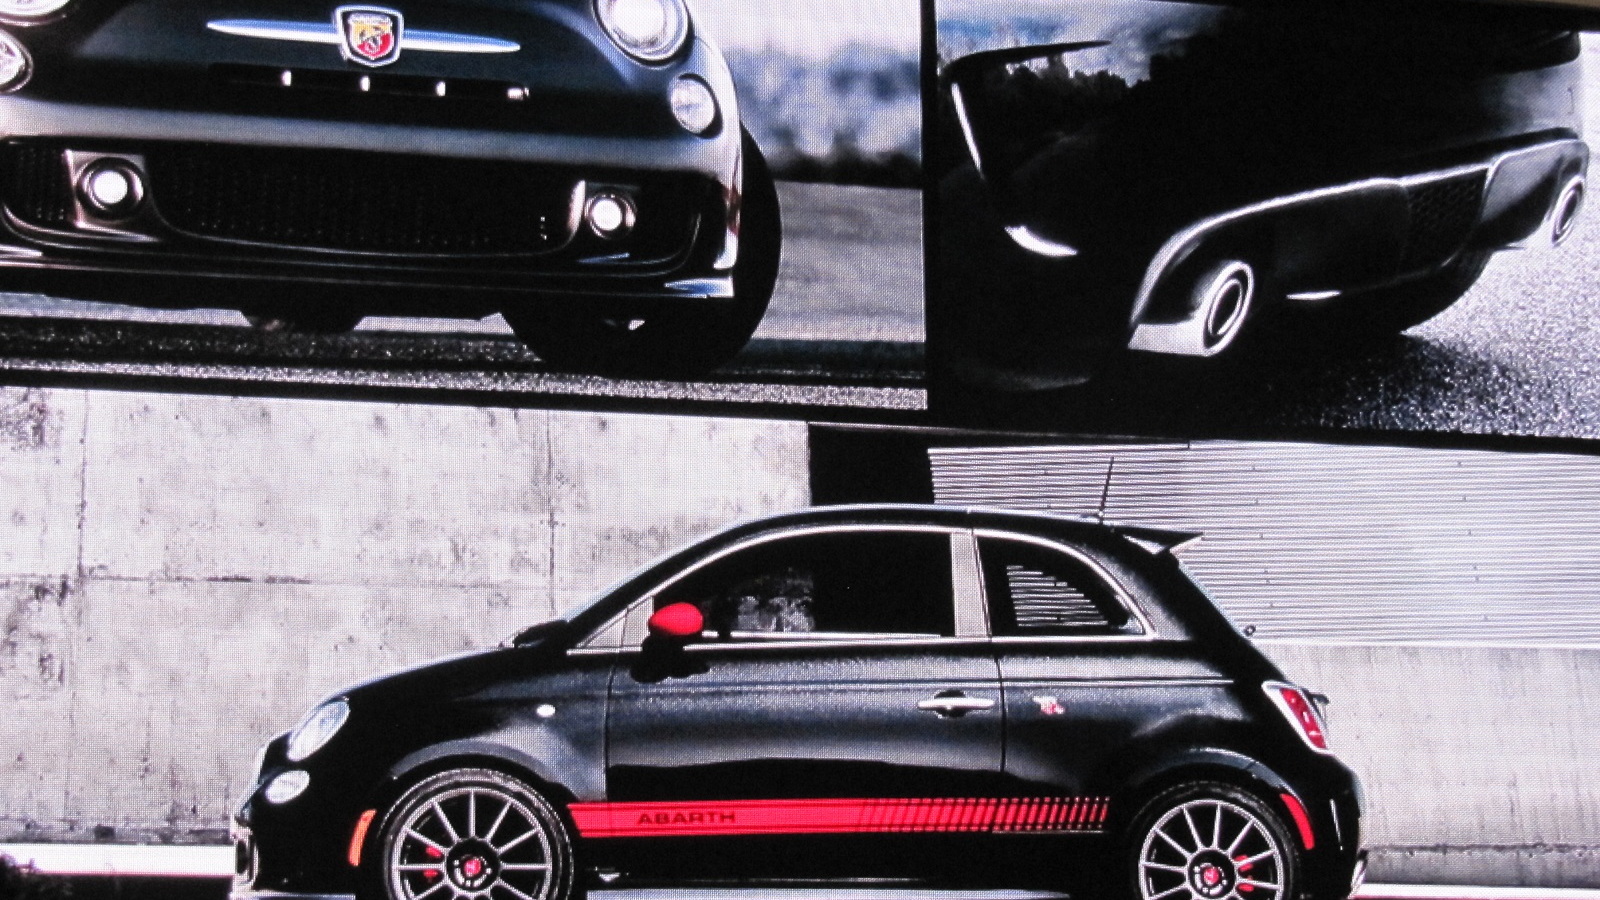 2012 Fiat 500 Abarth live reveal at Los Angeles Auto Show, Nov 2011